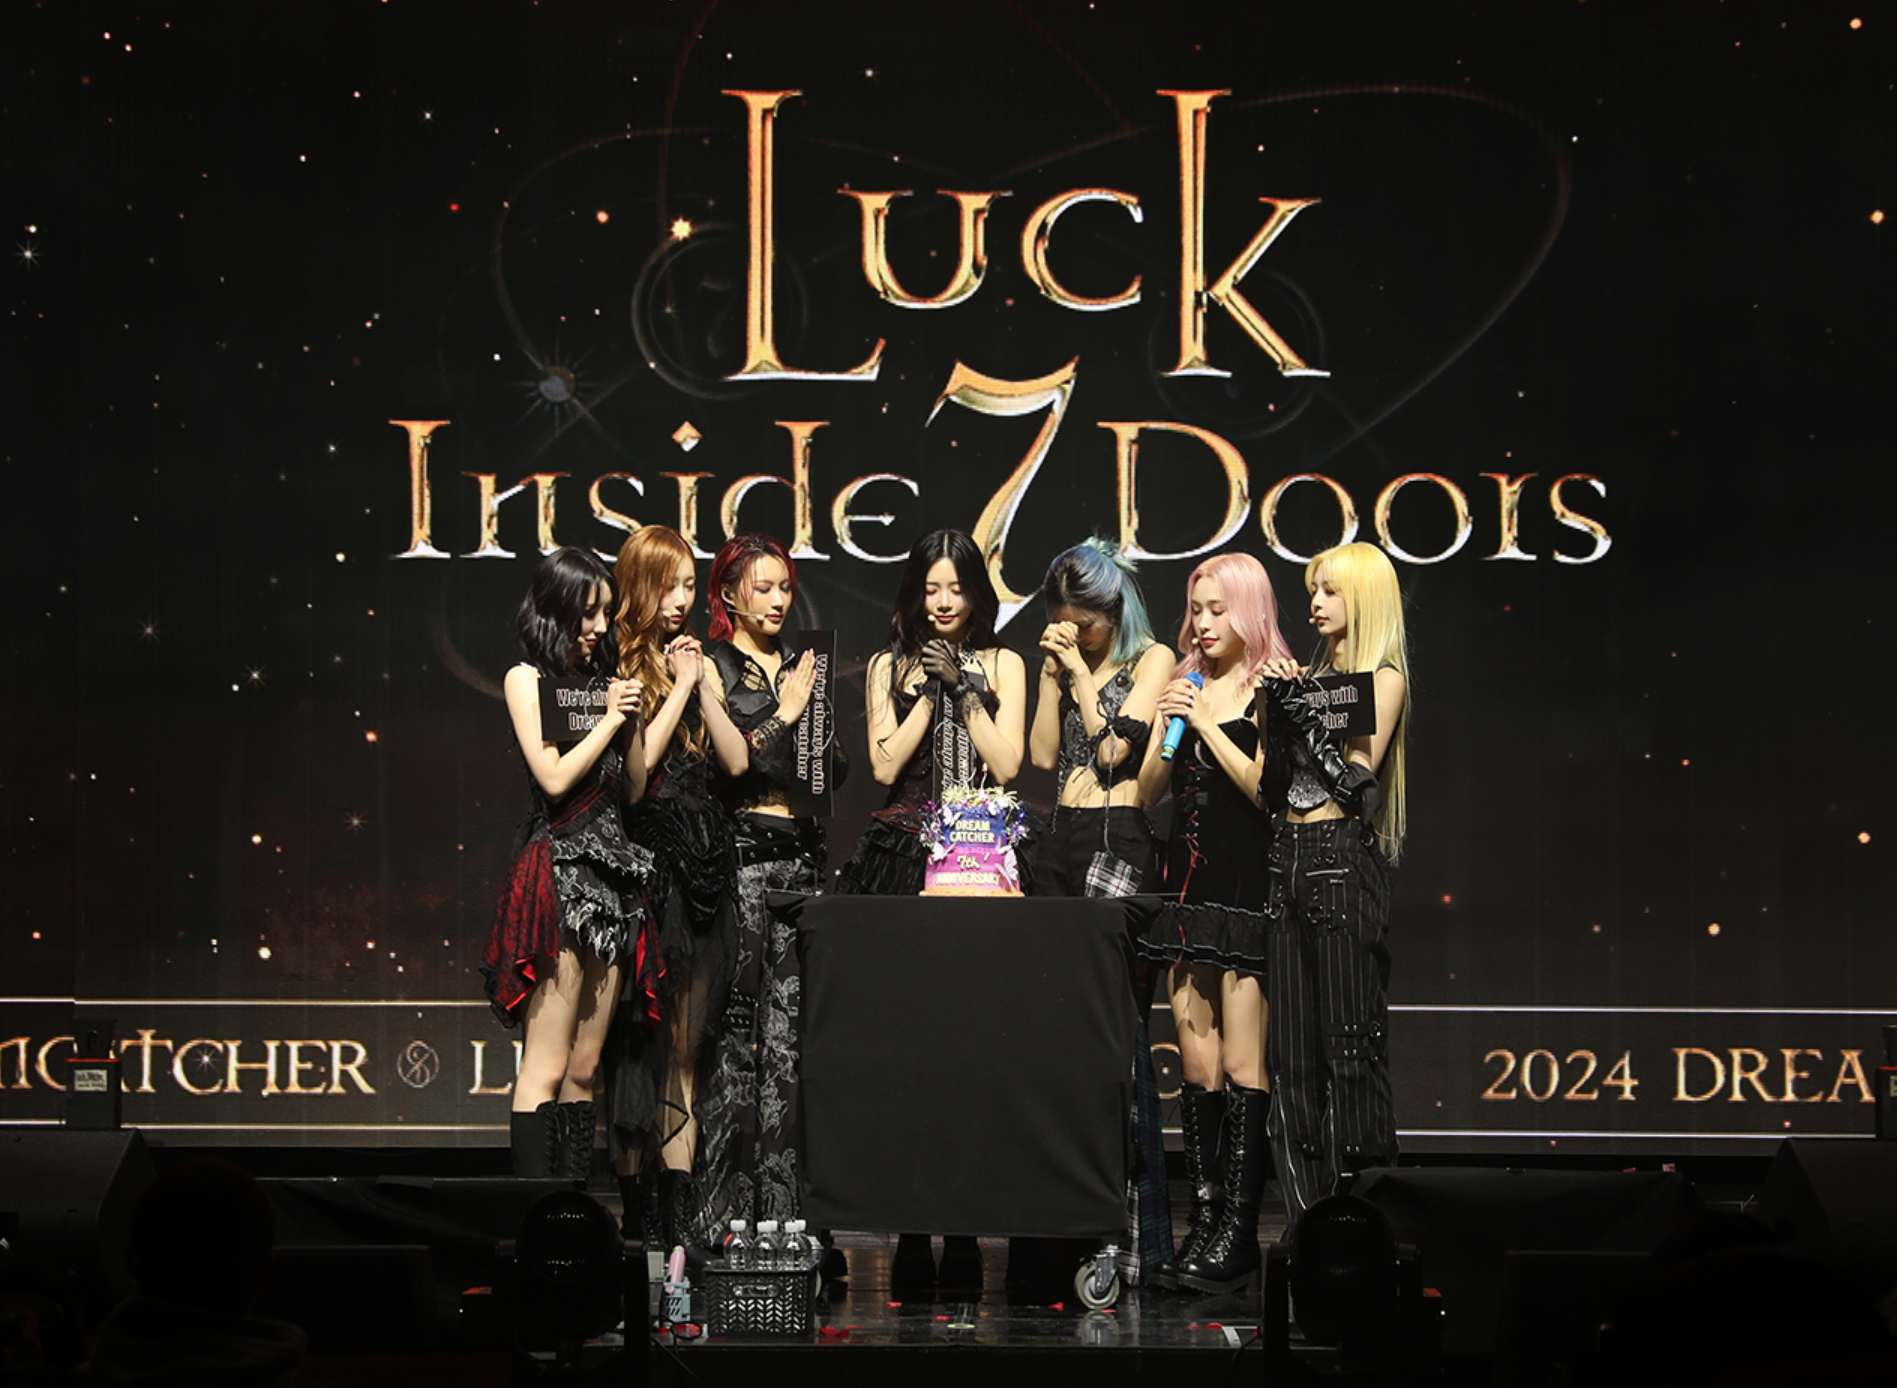 Dreamcatcher on-stage for their 7th anniversary content clasping their hands in prayer with a cake on stage.